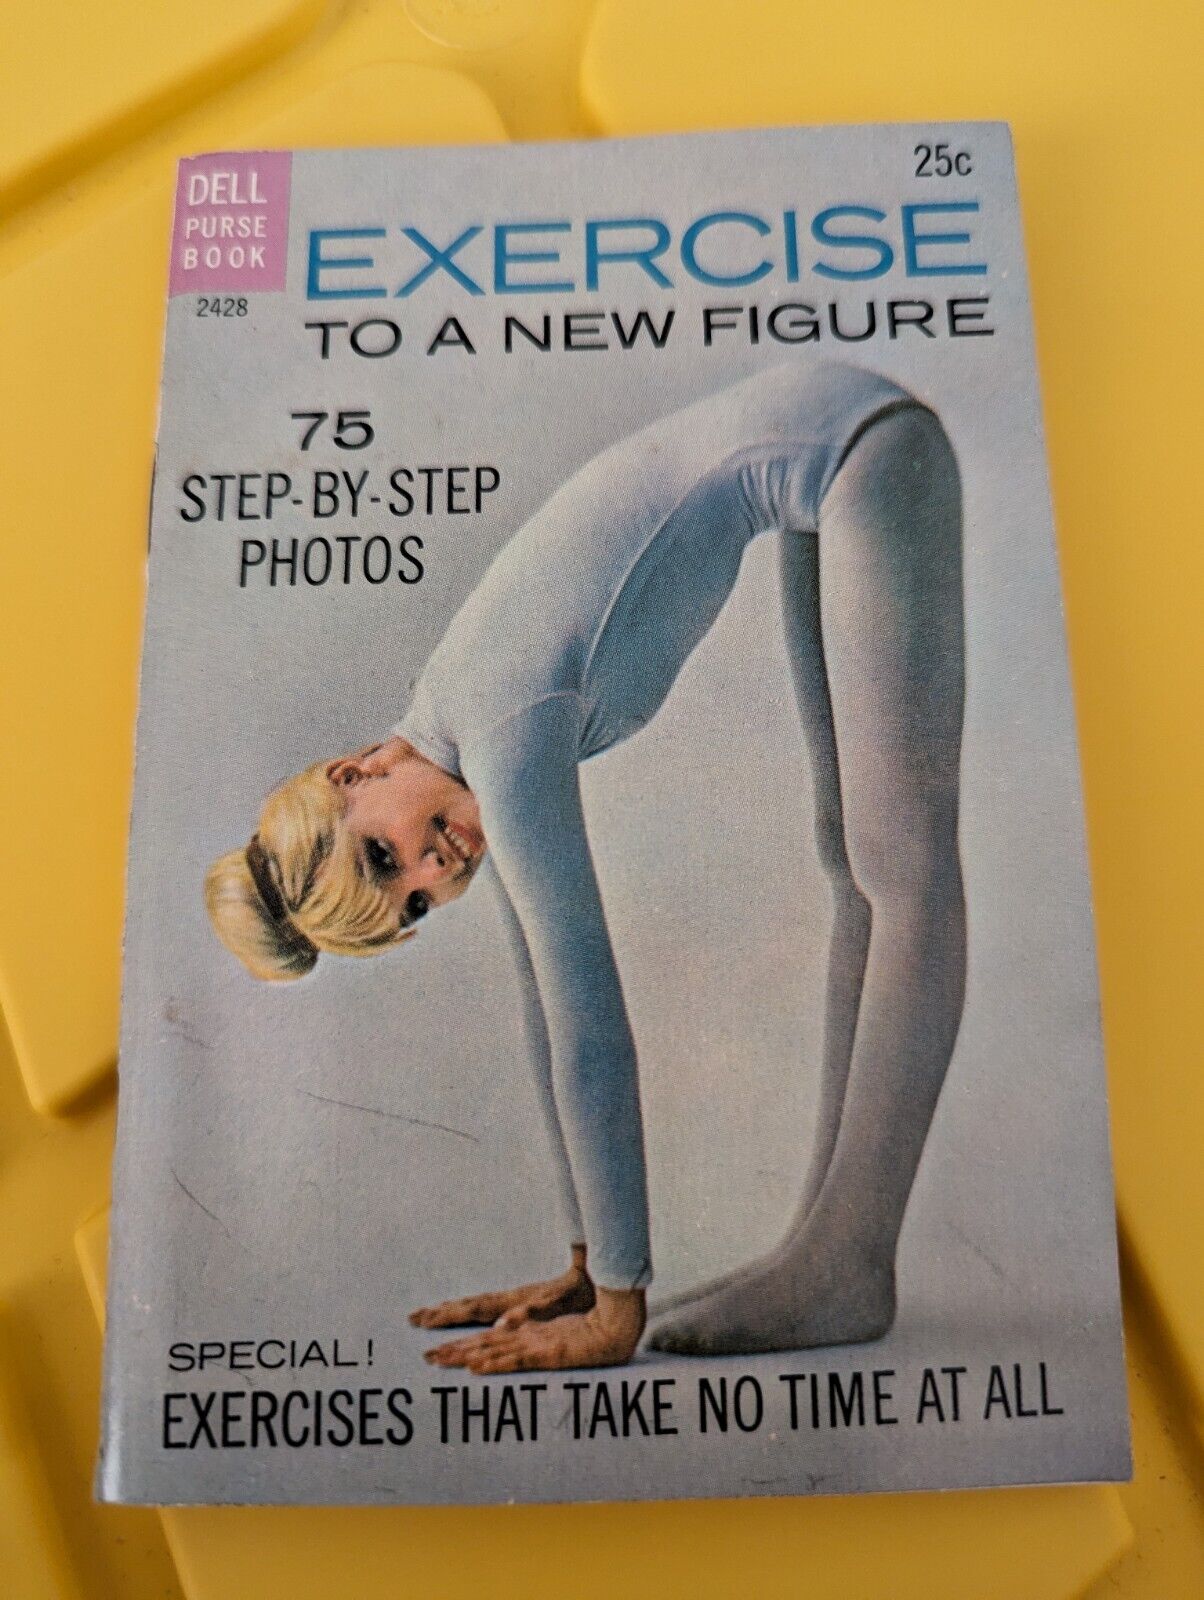 Vintage 1962 - Exercise To A New Figure Dell Purse Book #2428 Mini Booklet